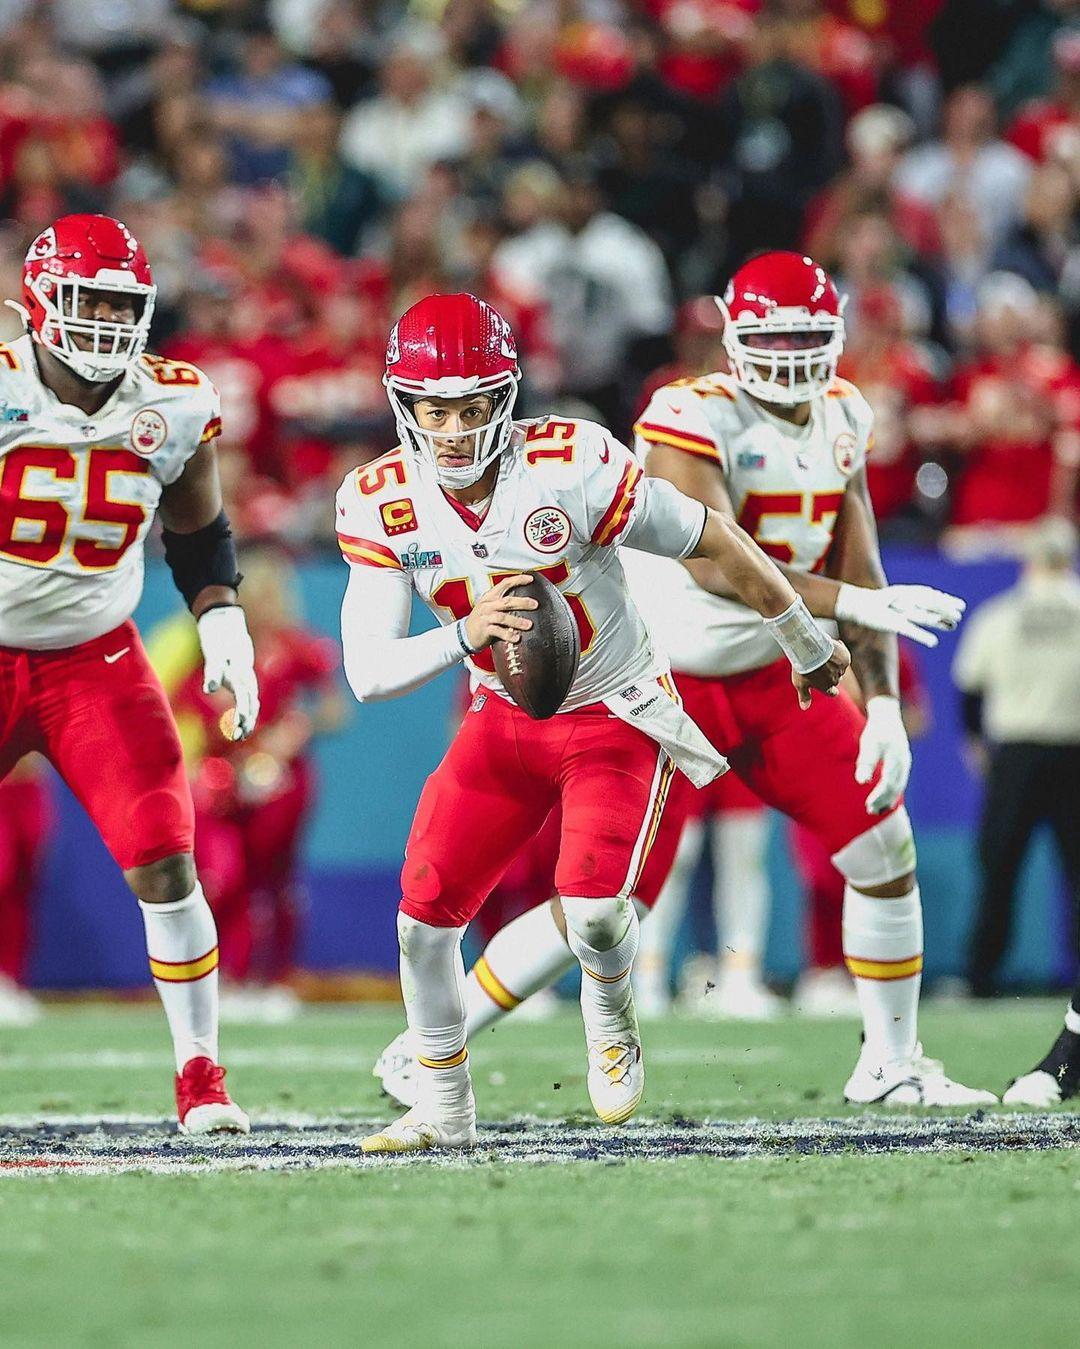 Patrick Mahomes Follows Through On Disney Visit With Family After Super Bowl Win